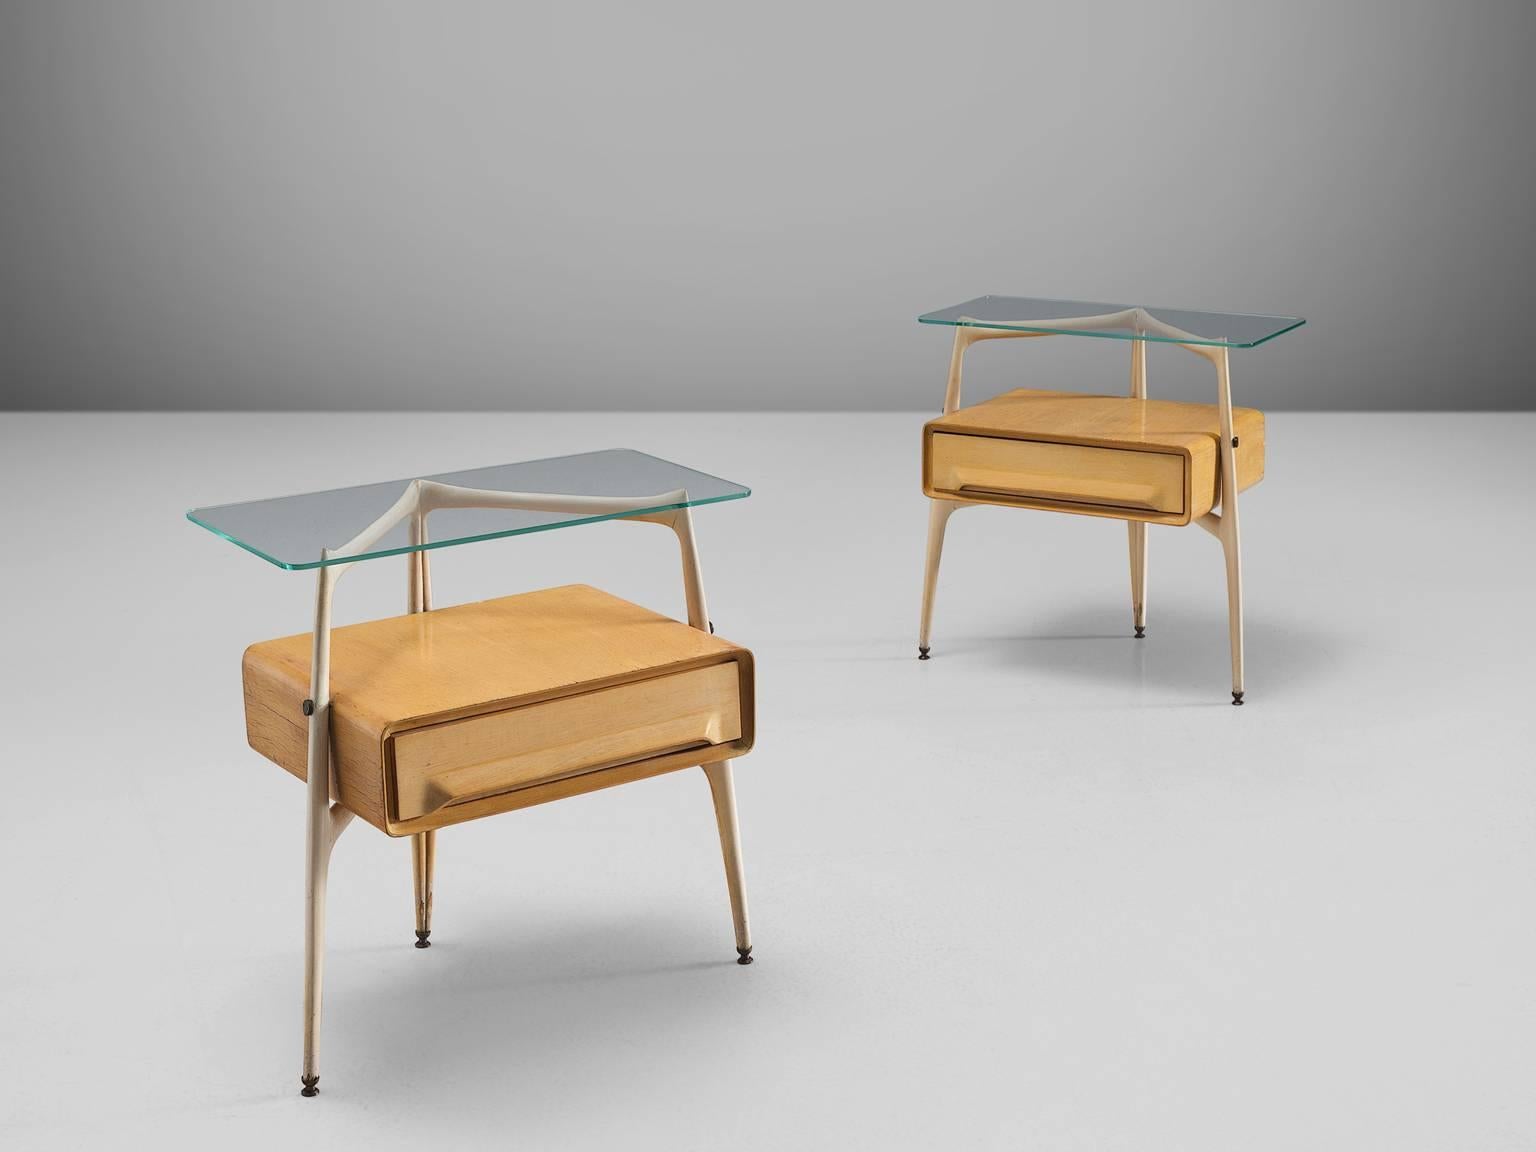 Silvio Cavatorta, maple and beech, brass, glass, Italy, 1950s.

These two delicate and sculptural bedside tables are designed by the Italian Silvio Cavatorta. The little maple cabinets feature one drawer each and have a tripod frame. The frame is